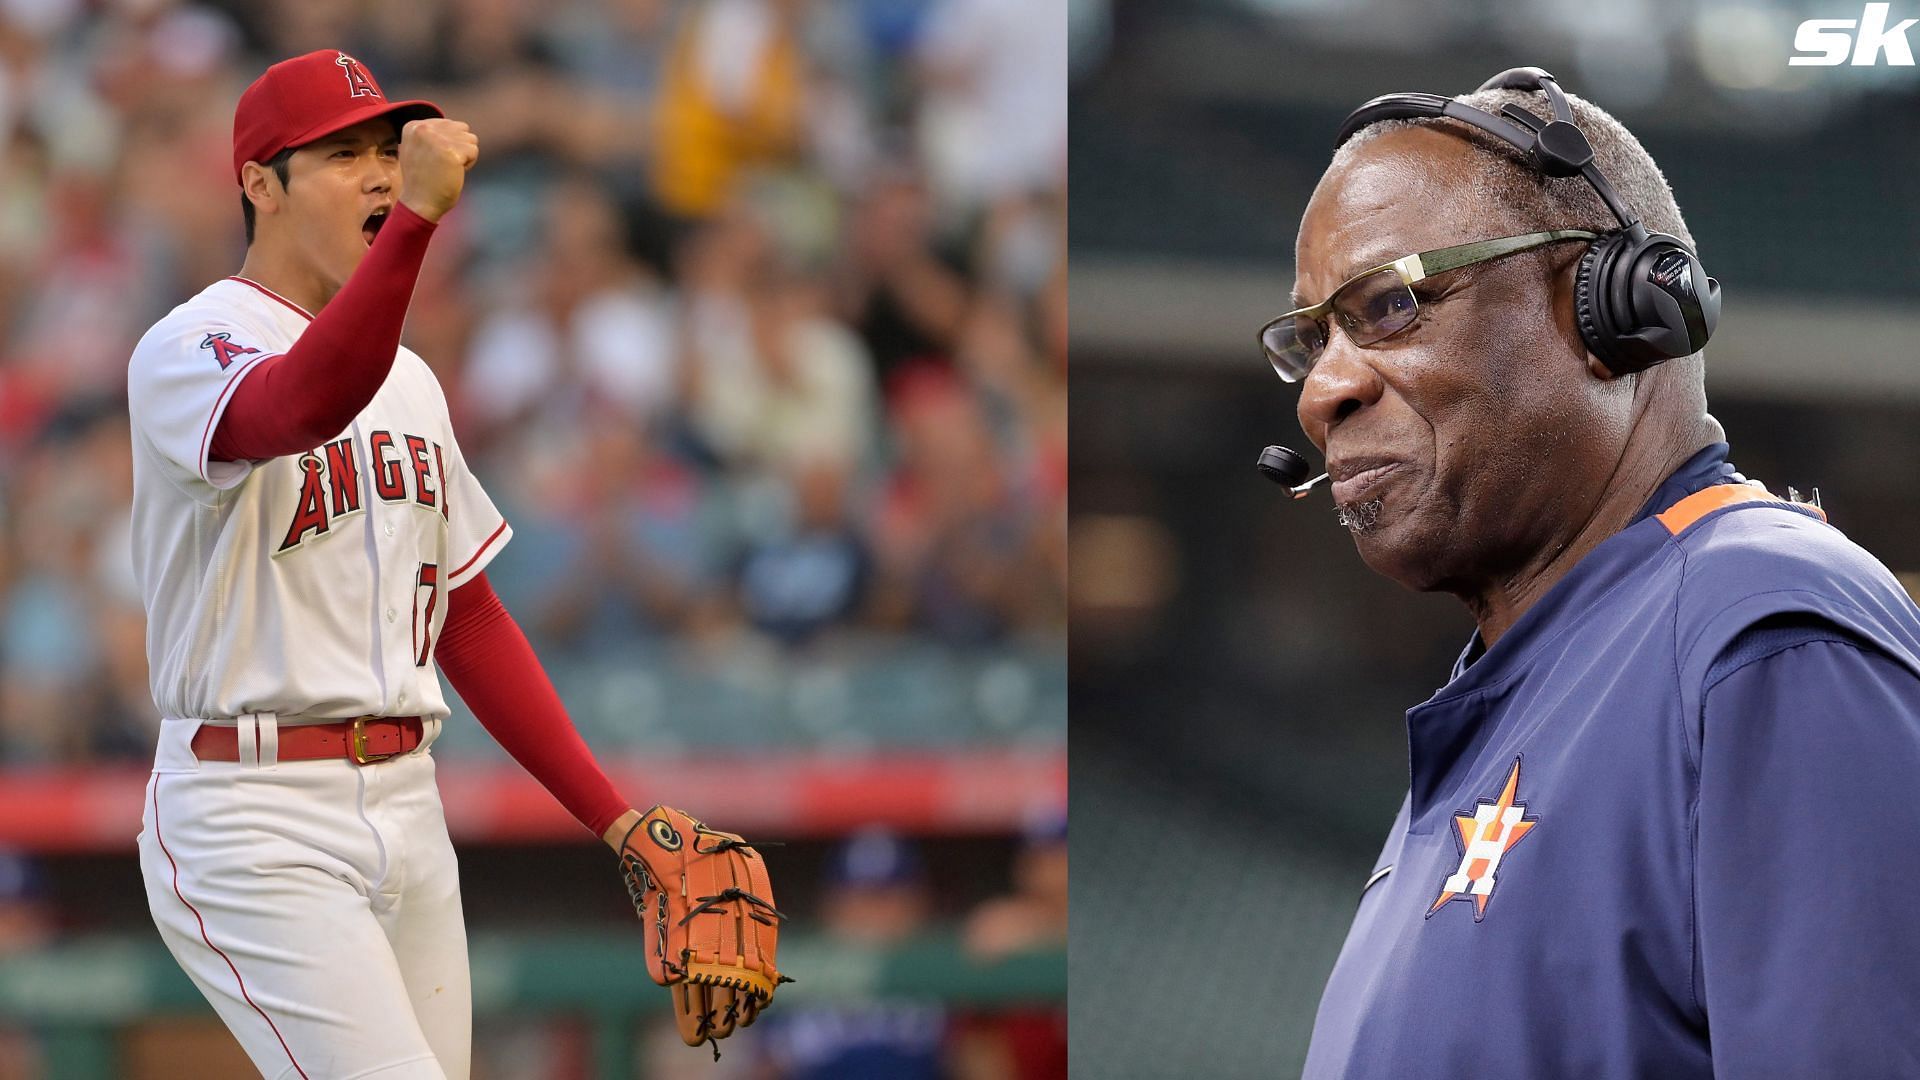 Shohei Ohtani of the Los Angeles Angels and Dusty Baker of the Houston Astros